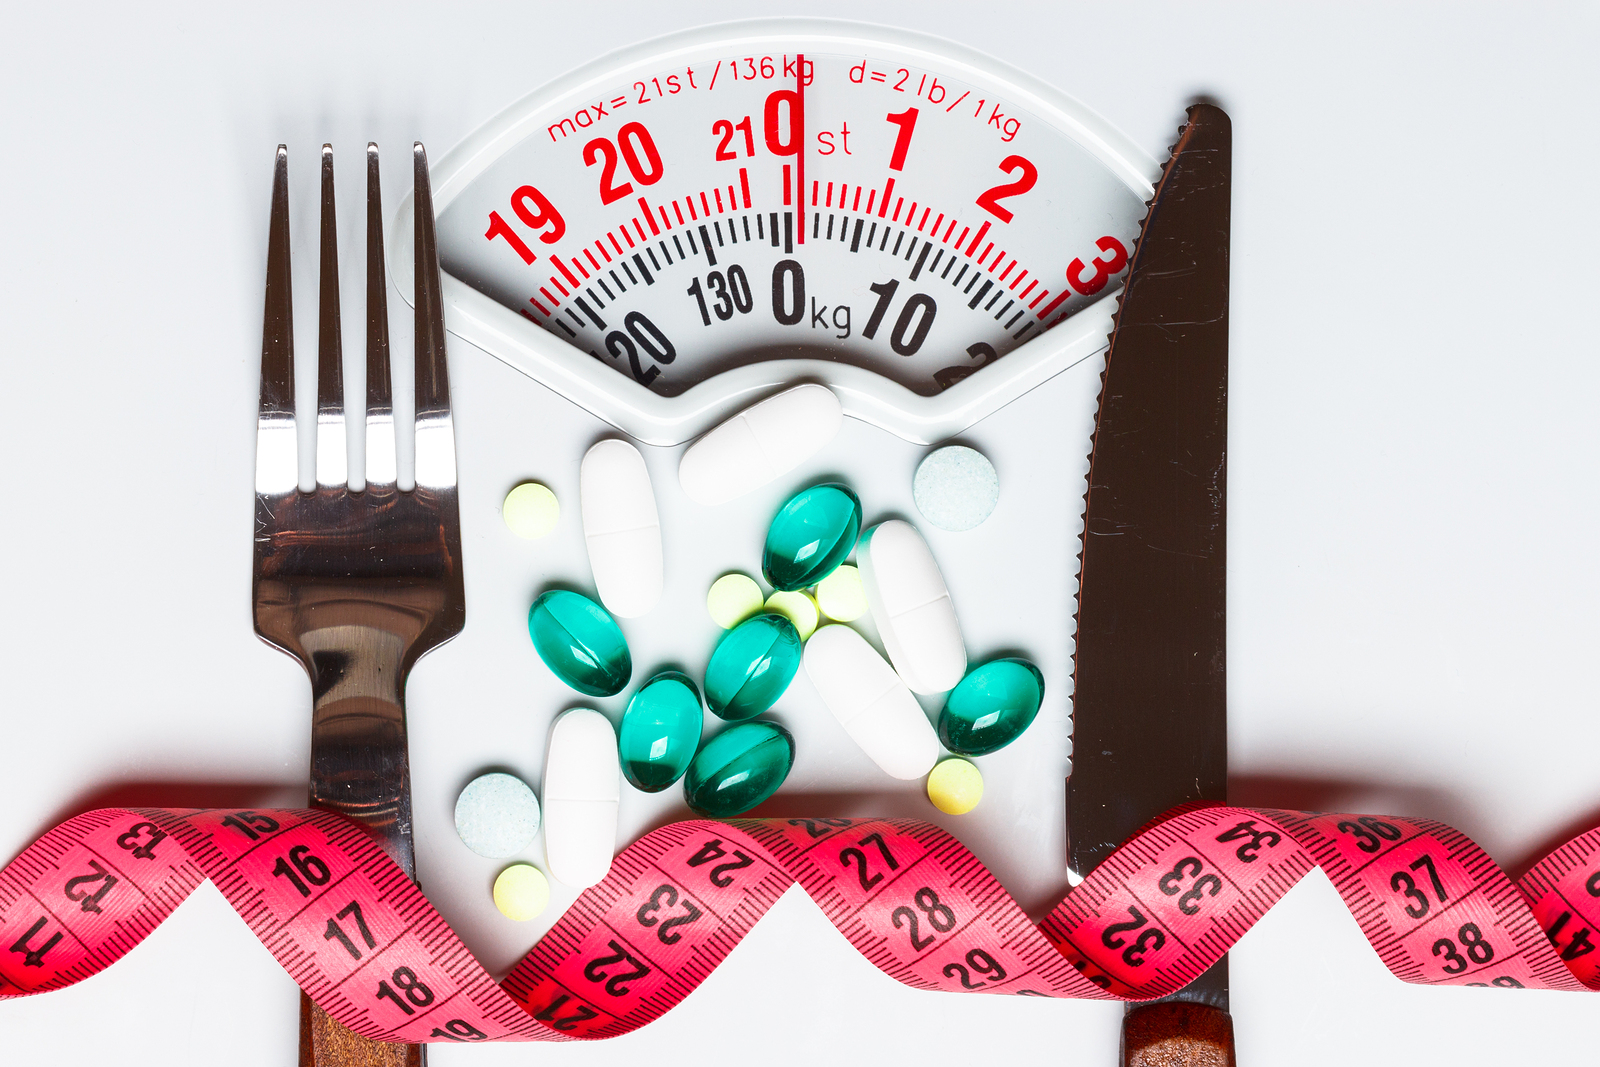 Healthy eating medicine health care food supplements and weight loss concept. Pills with measuring tape on white scales